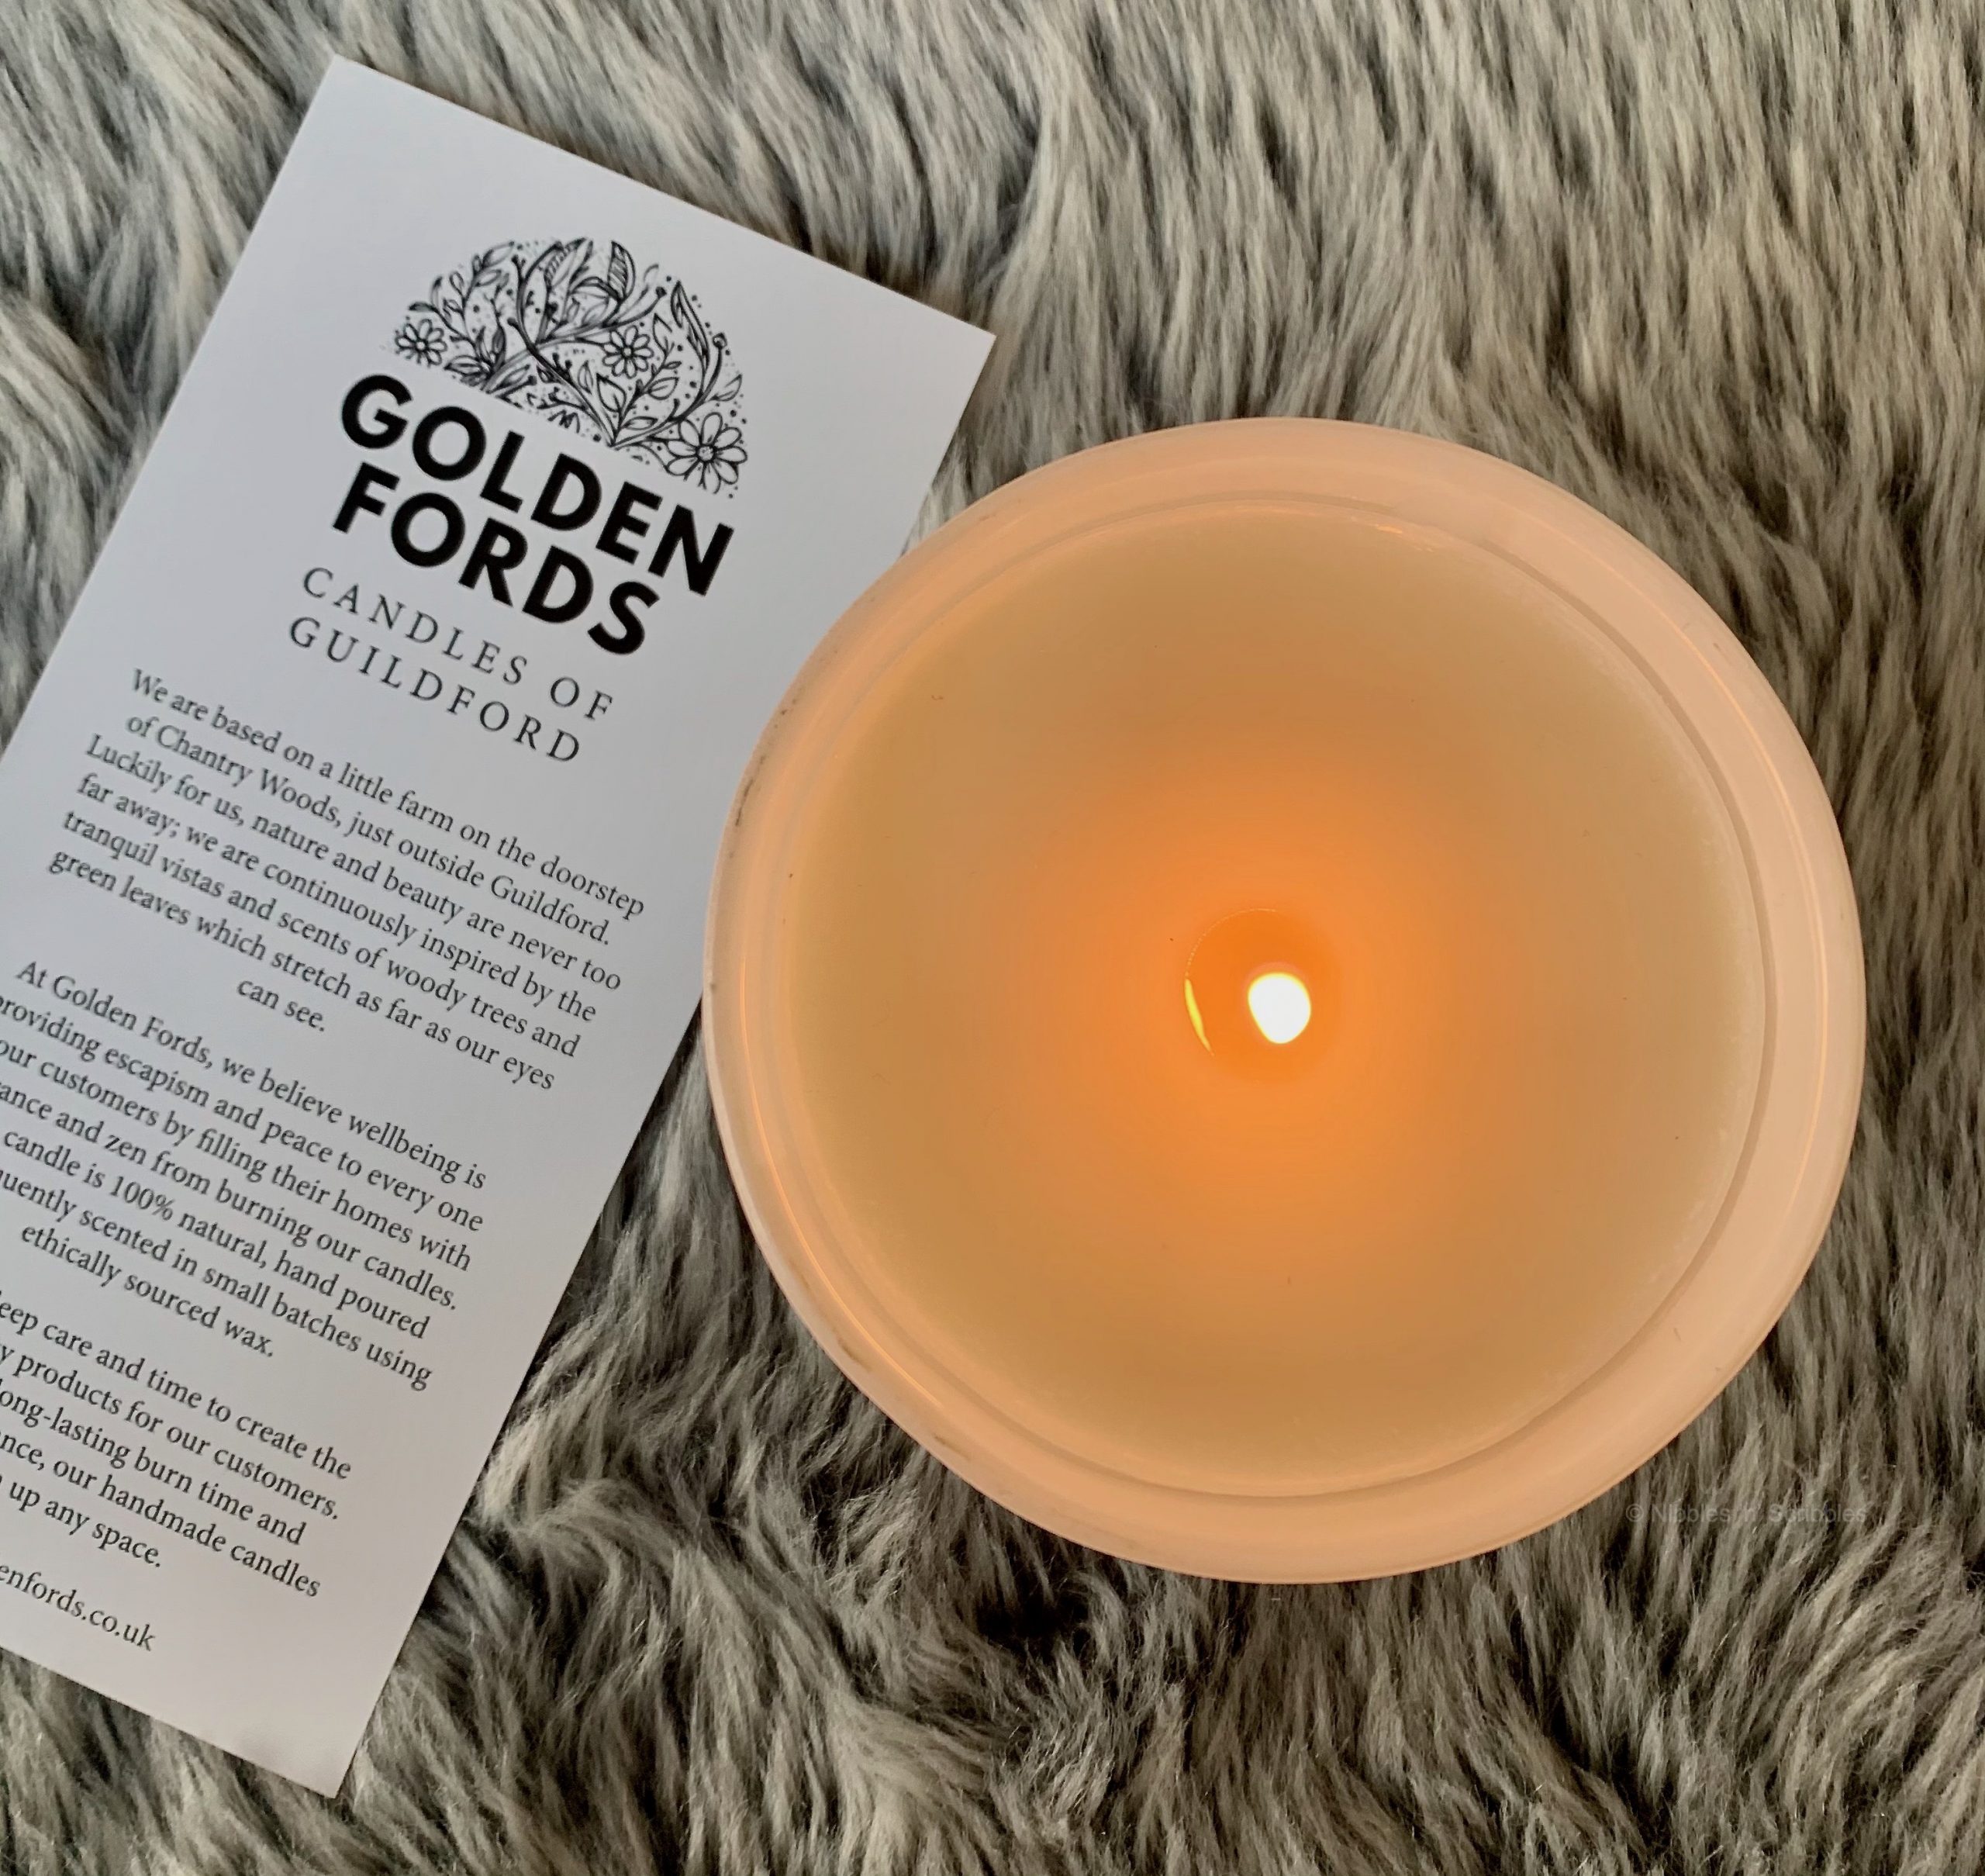 Golden Fords Orange, Cranberry and Cinnamon Candle review nibbles n scribbles